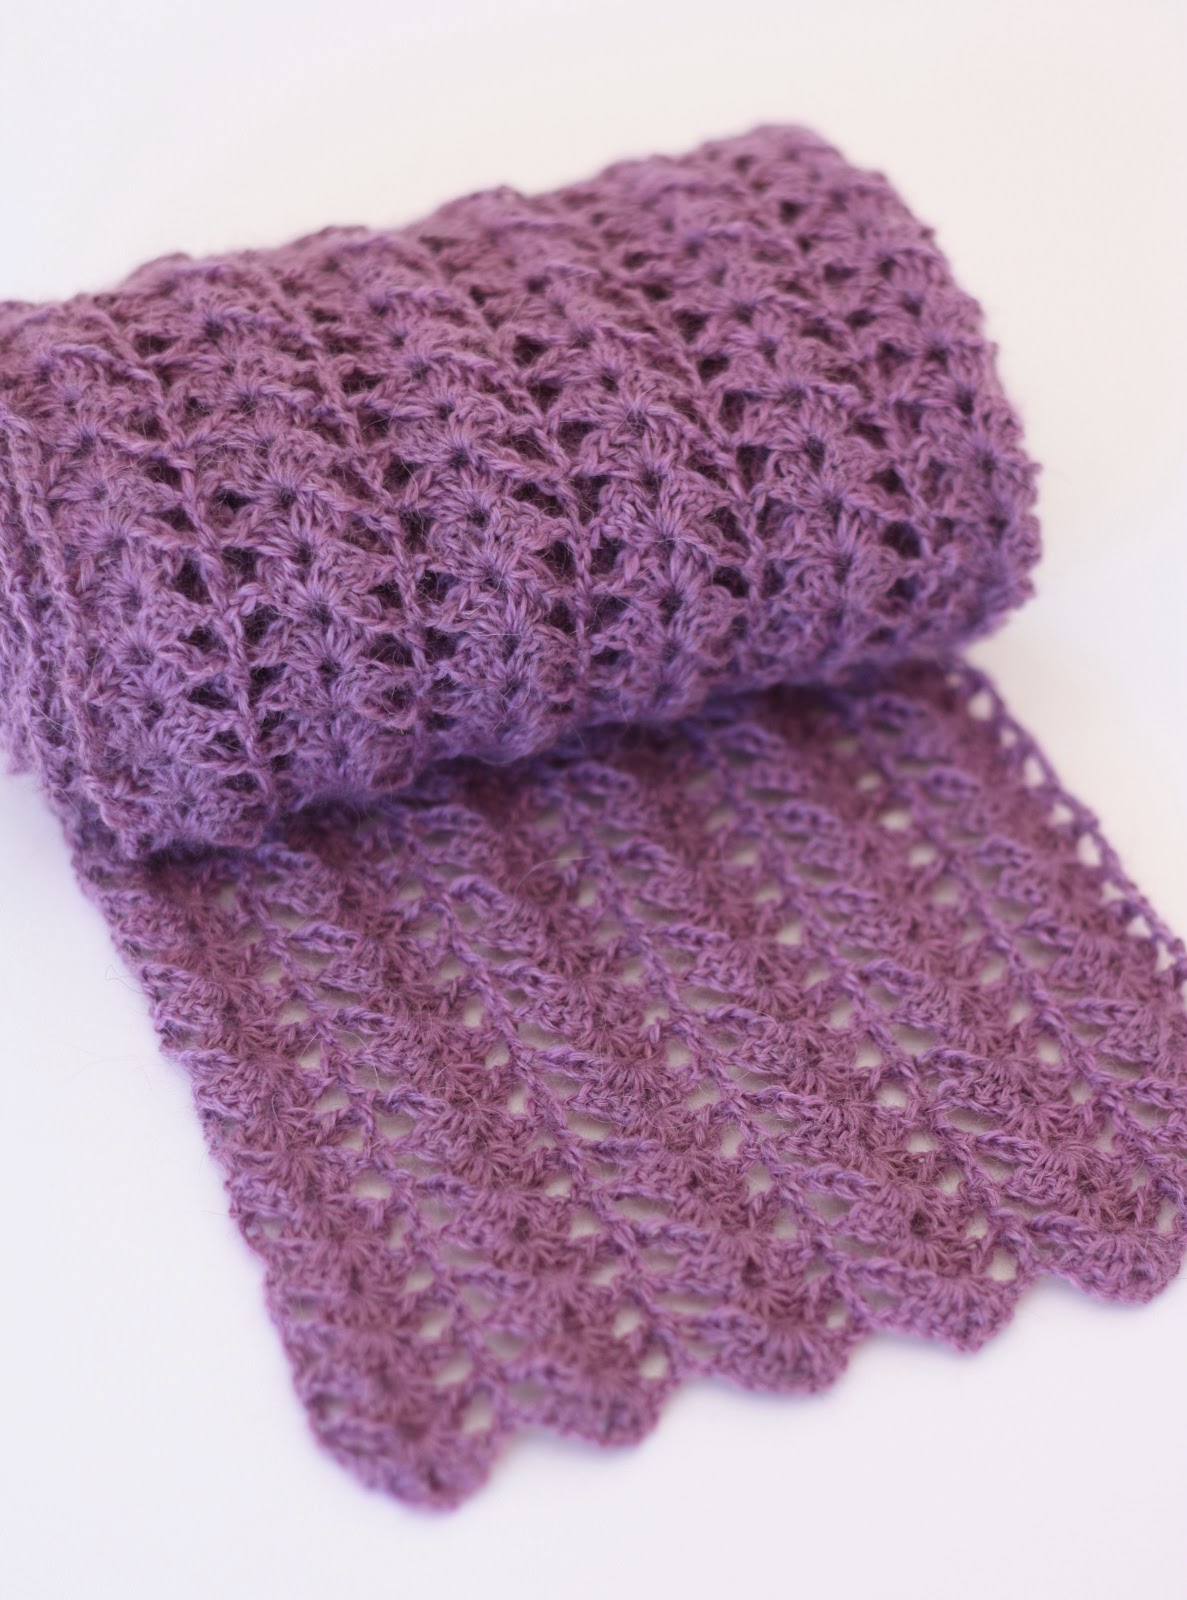 Crocheted Scarf Free Pattern - A Spoonful Of Sugar